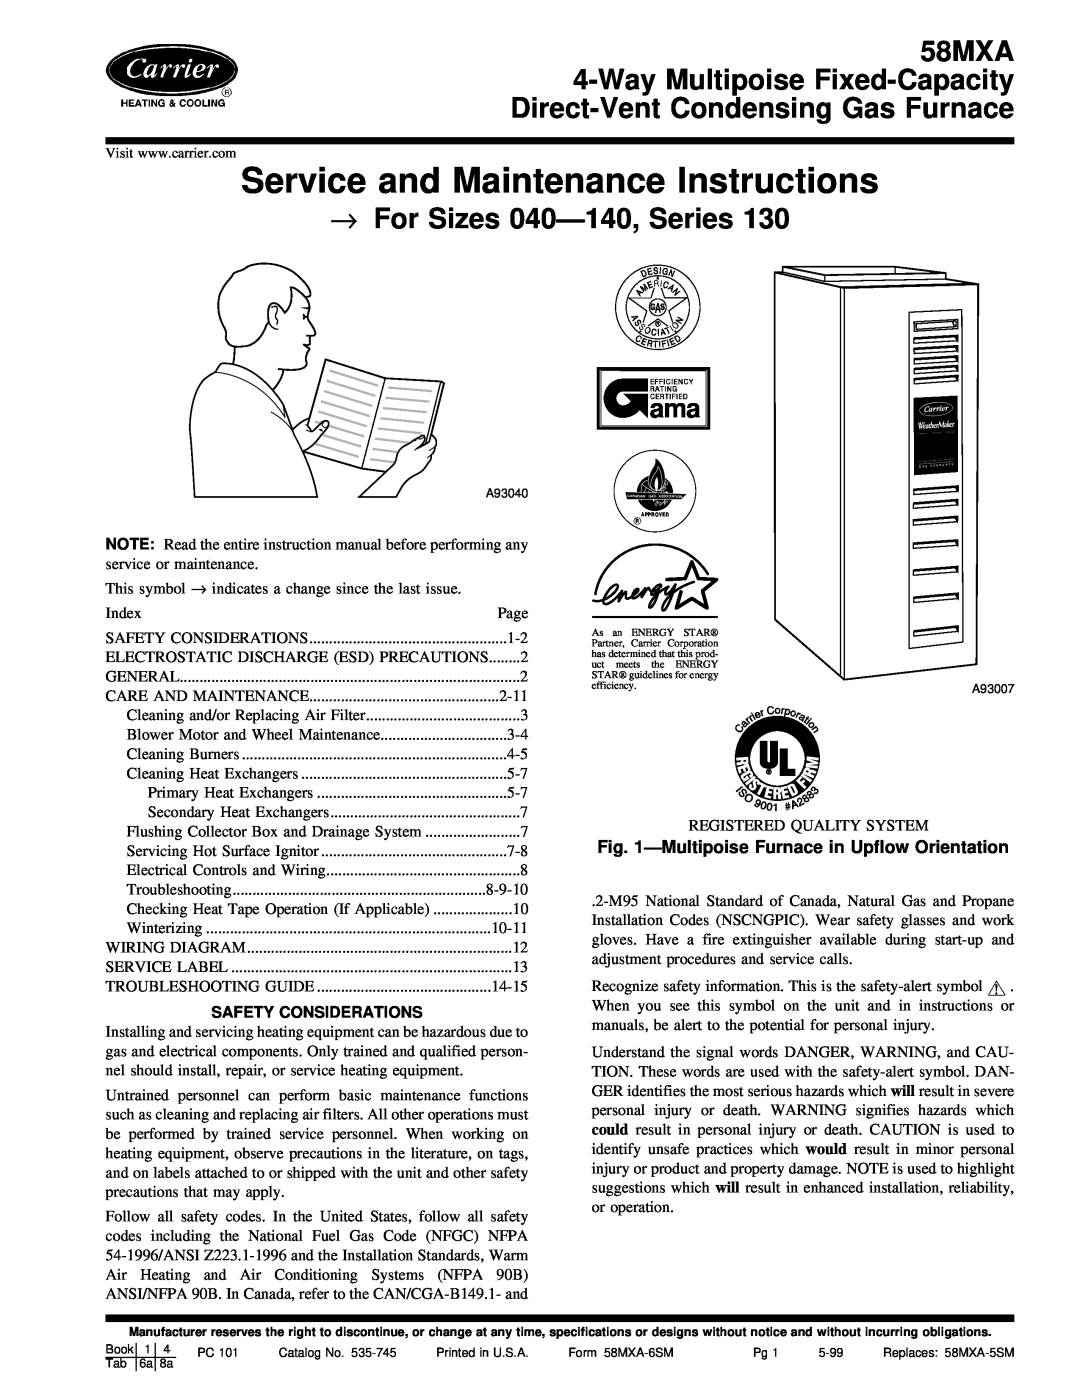 Carrier 58MXA instruction manual Service and Maintenance Instructions, →For Sizes 040Ð140, Series, Safety Considerations 